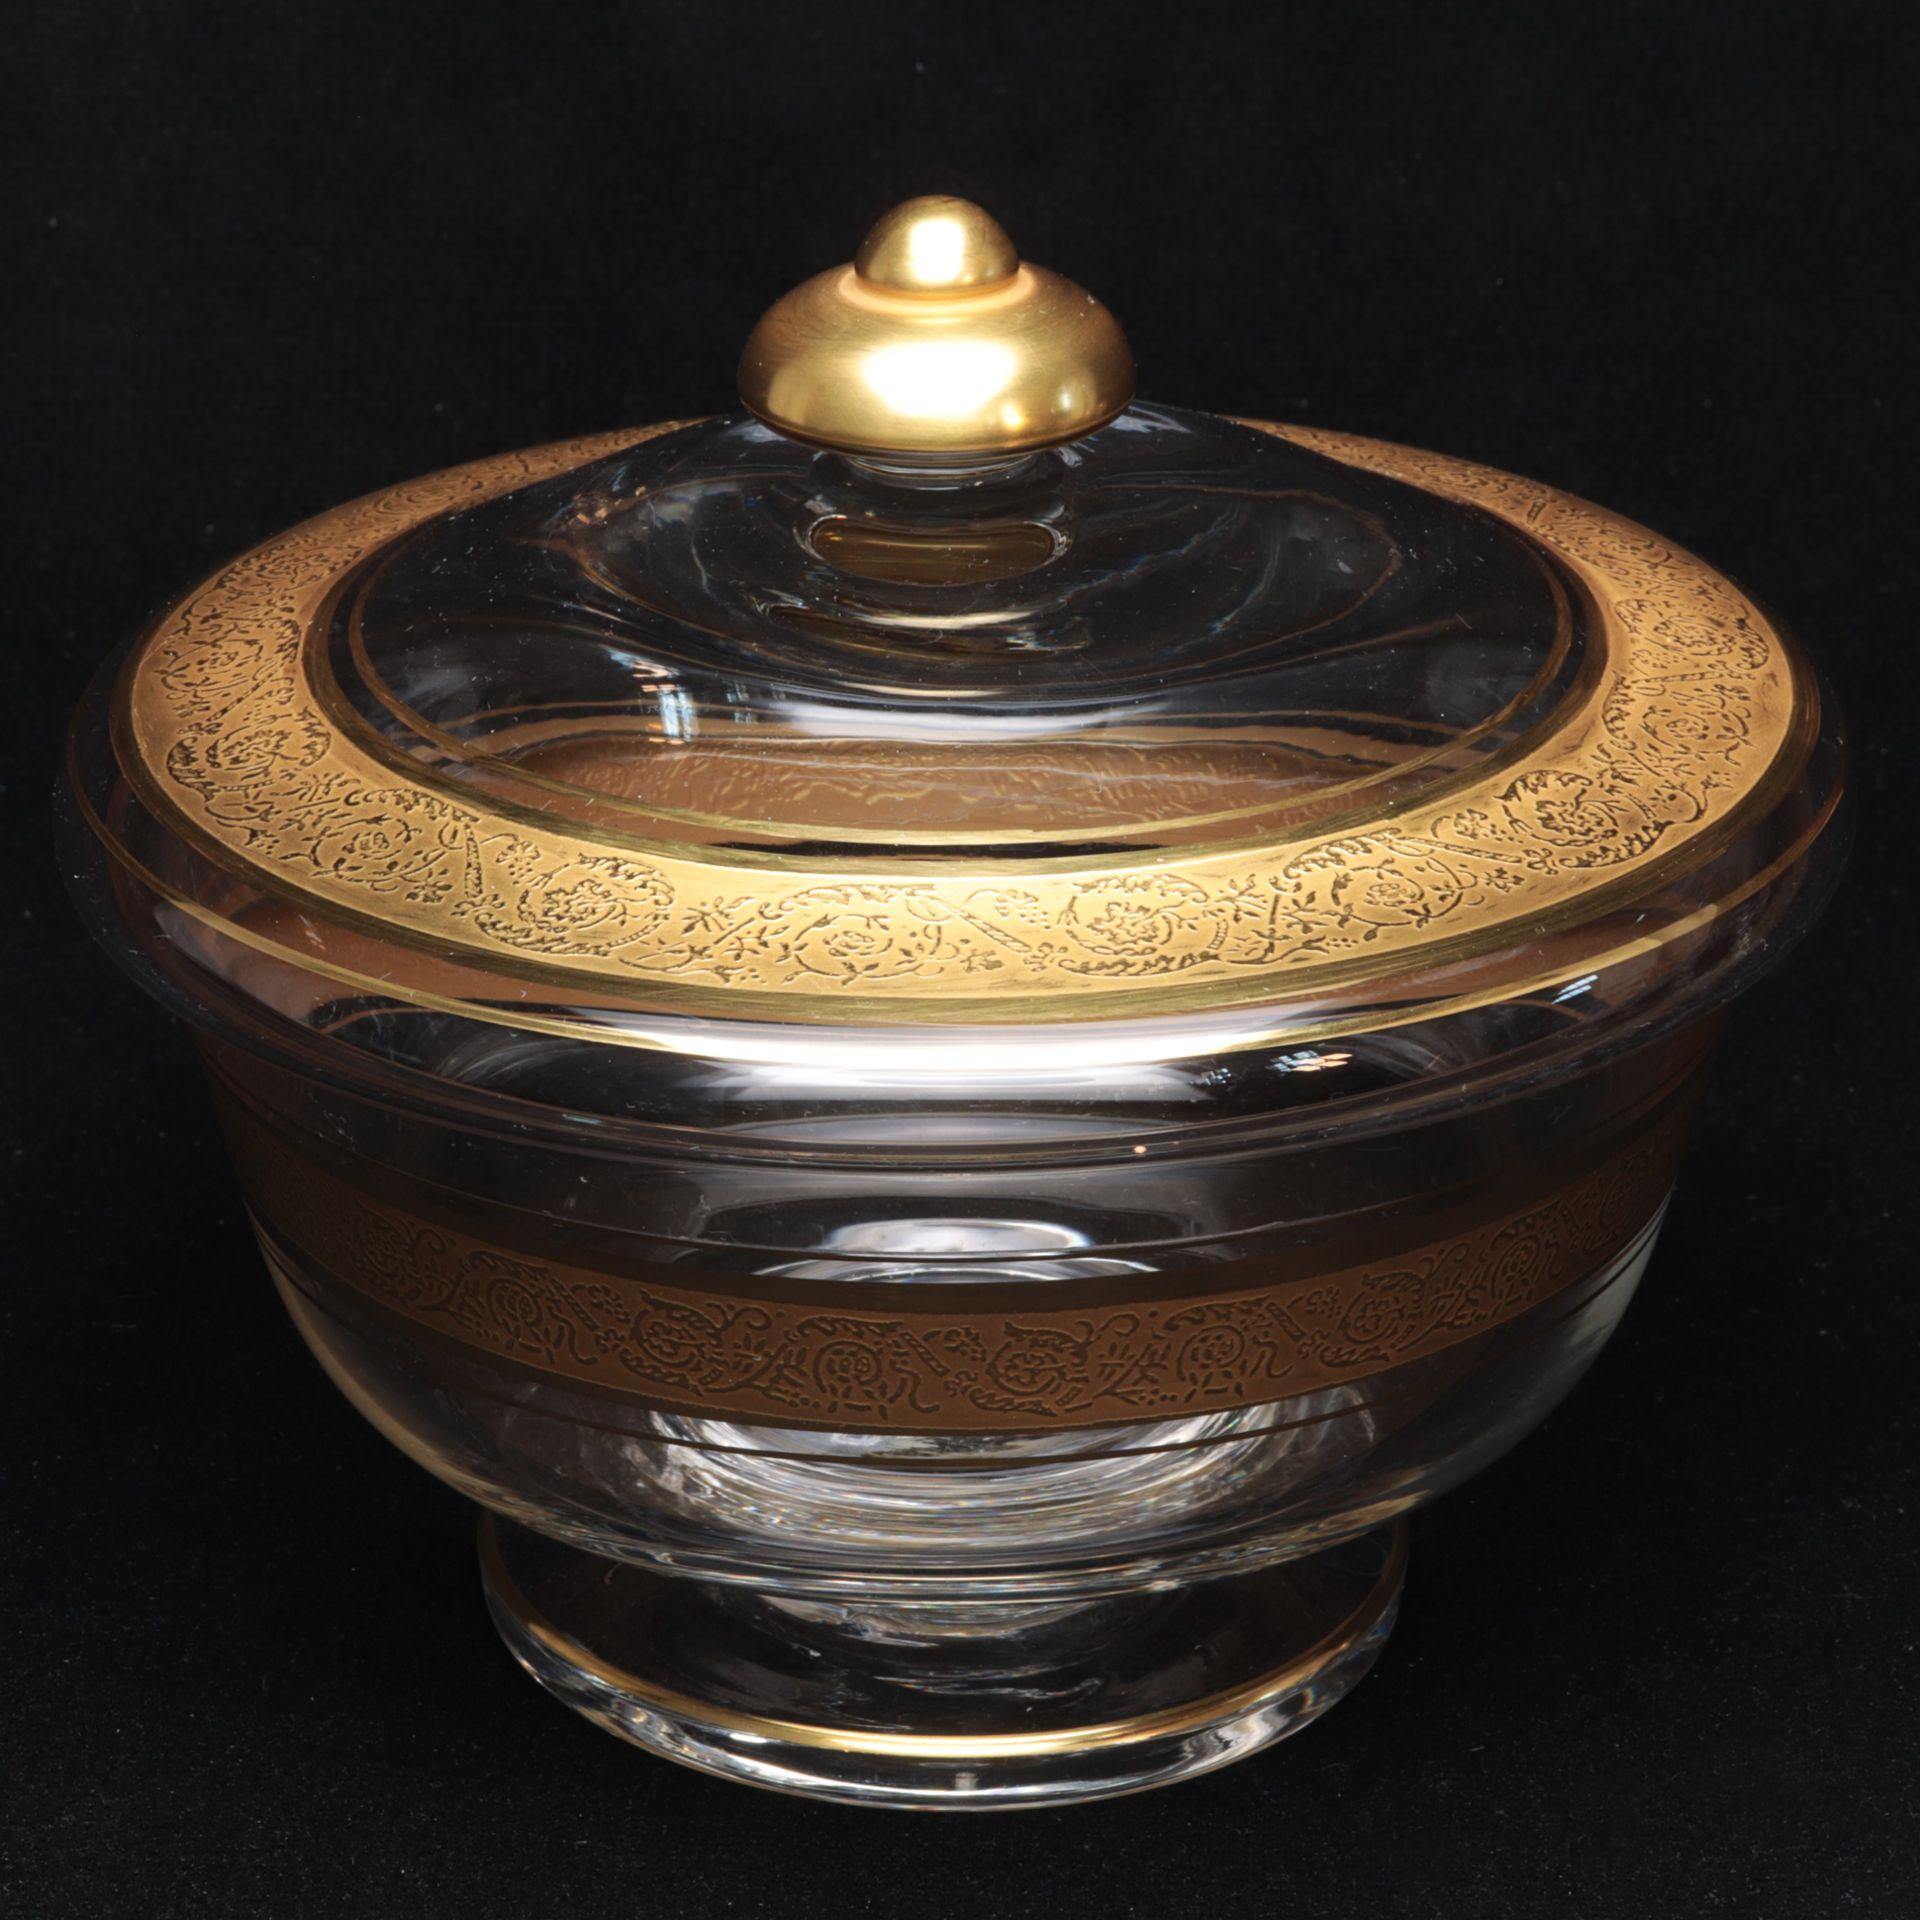 Beautiful hand blown lidded glass bowl, a colorless thick glass, with a lid. stylized floral engraving and relief decoration, 24 karat gold-colored painted. A nice addition to any table.